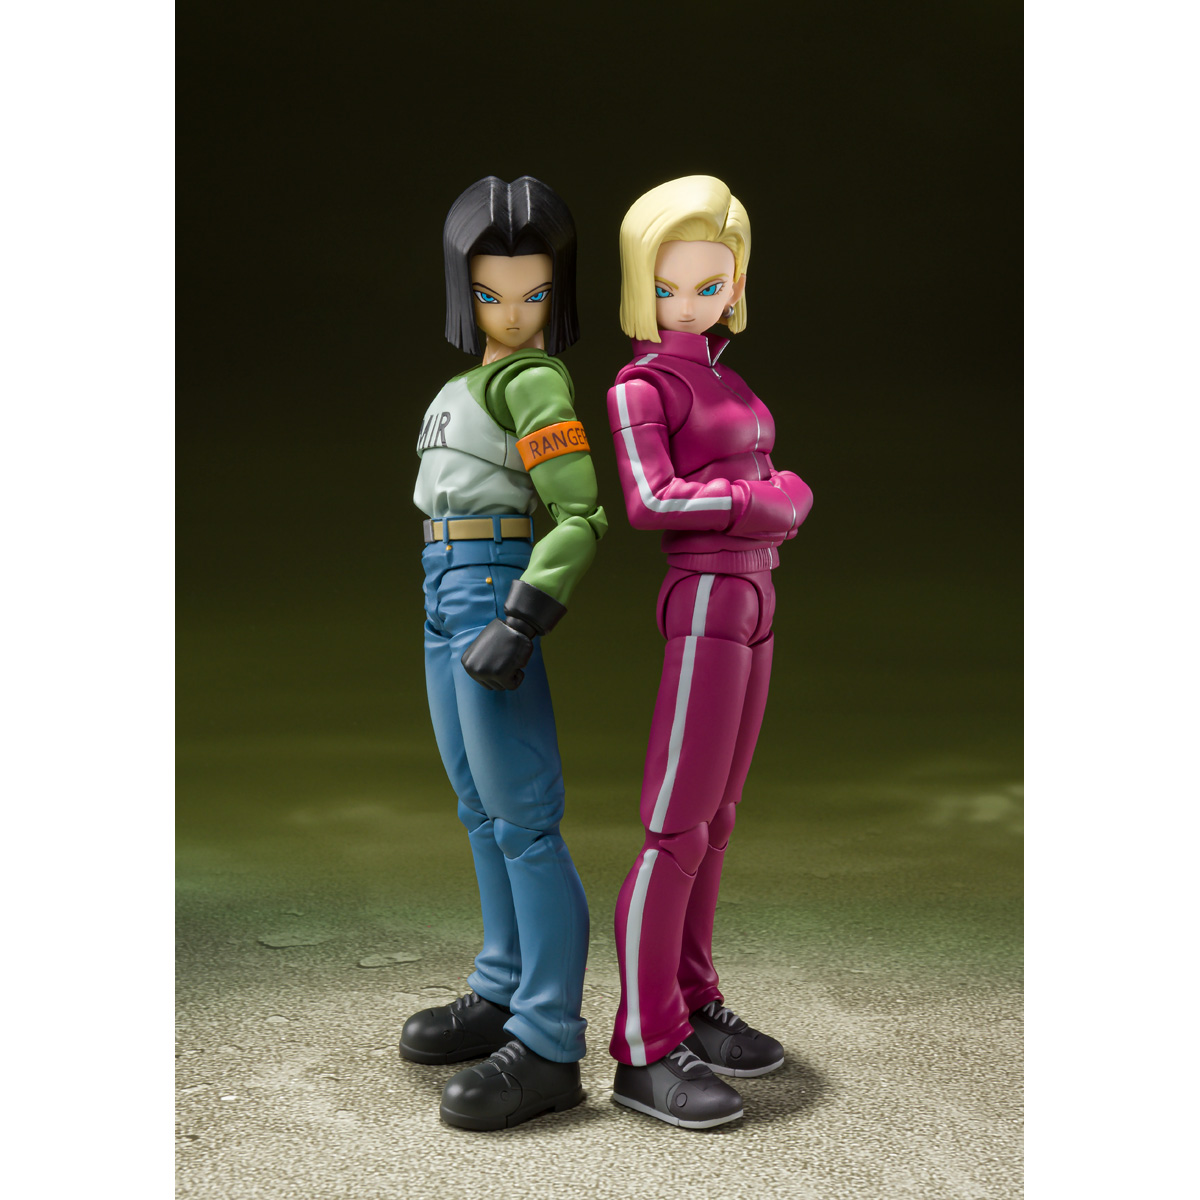 Dragonball Z Androids Saga Android 18 Action Figure Irwin Toys NEW